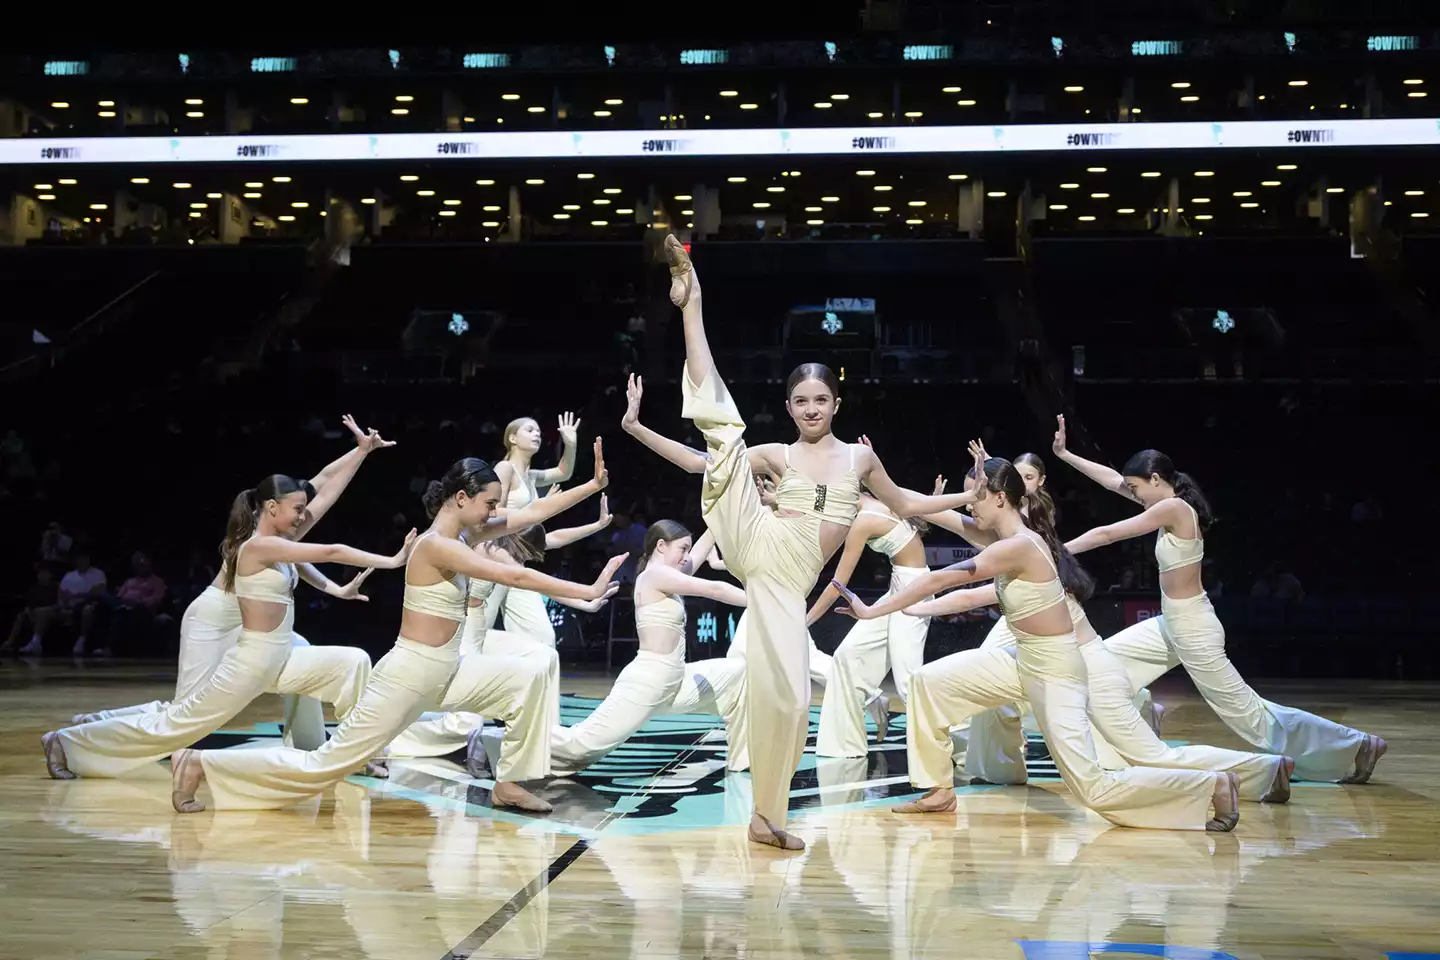 DDF's Company Blue performs half-time at a WNBA NY Liberty game!